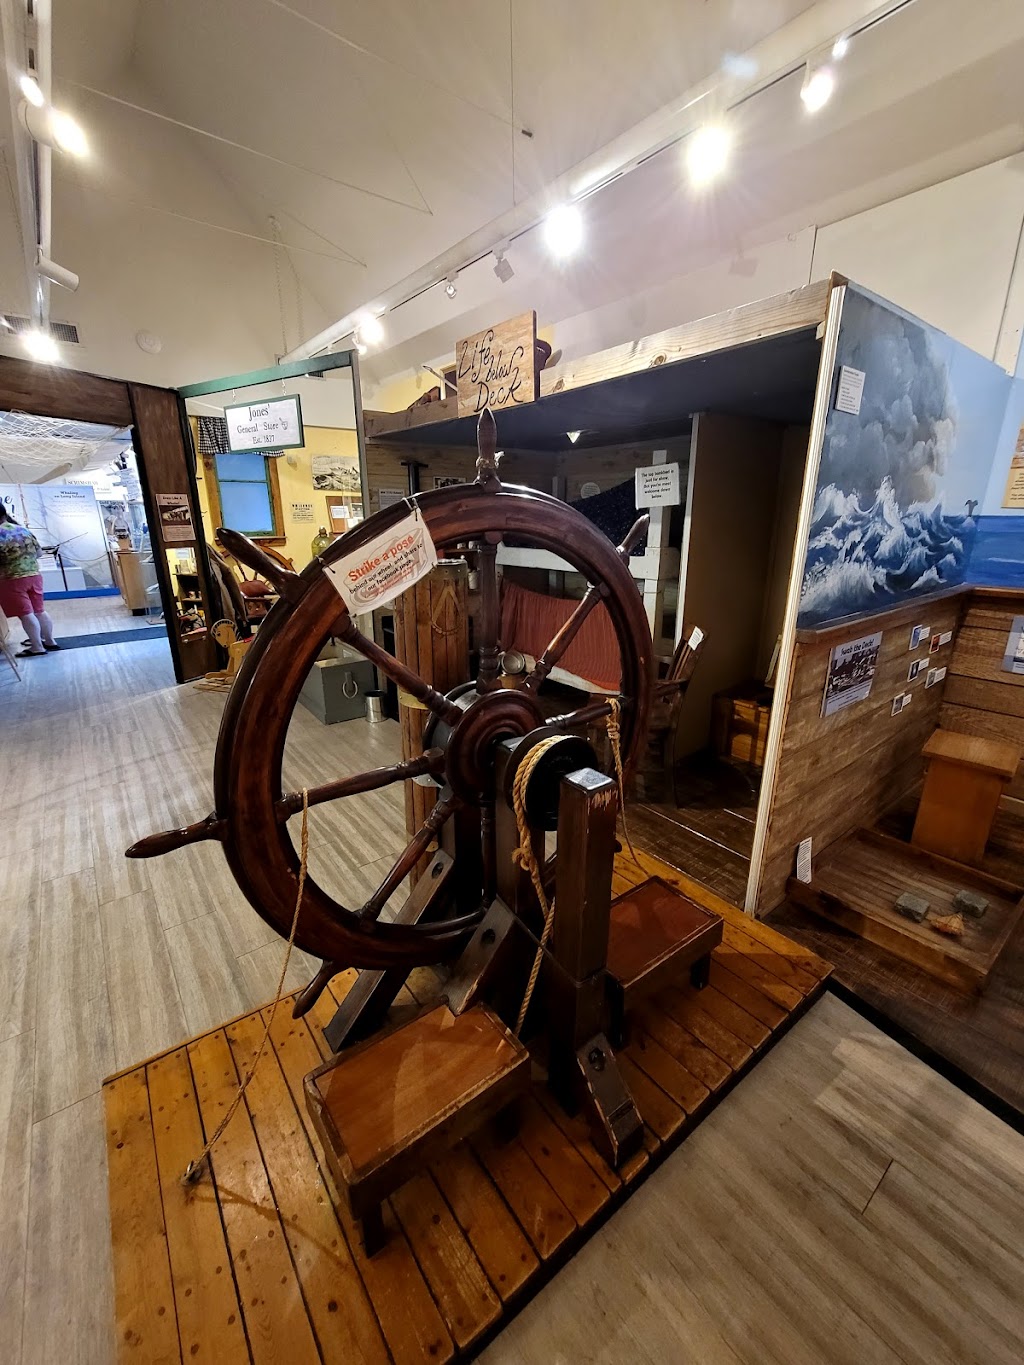 The Whaling Museum & Education Center of Cold Spring Harbor | 301 Main St, Cold Spring Harbor, NY 11724 | Phone: (631) 367-3418